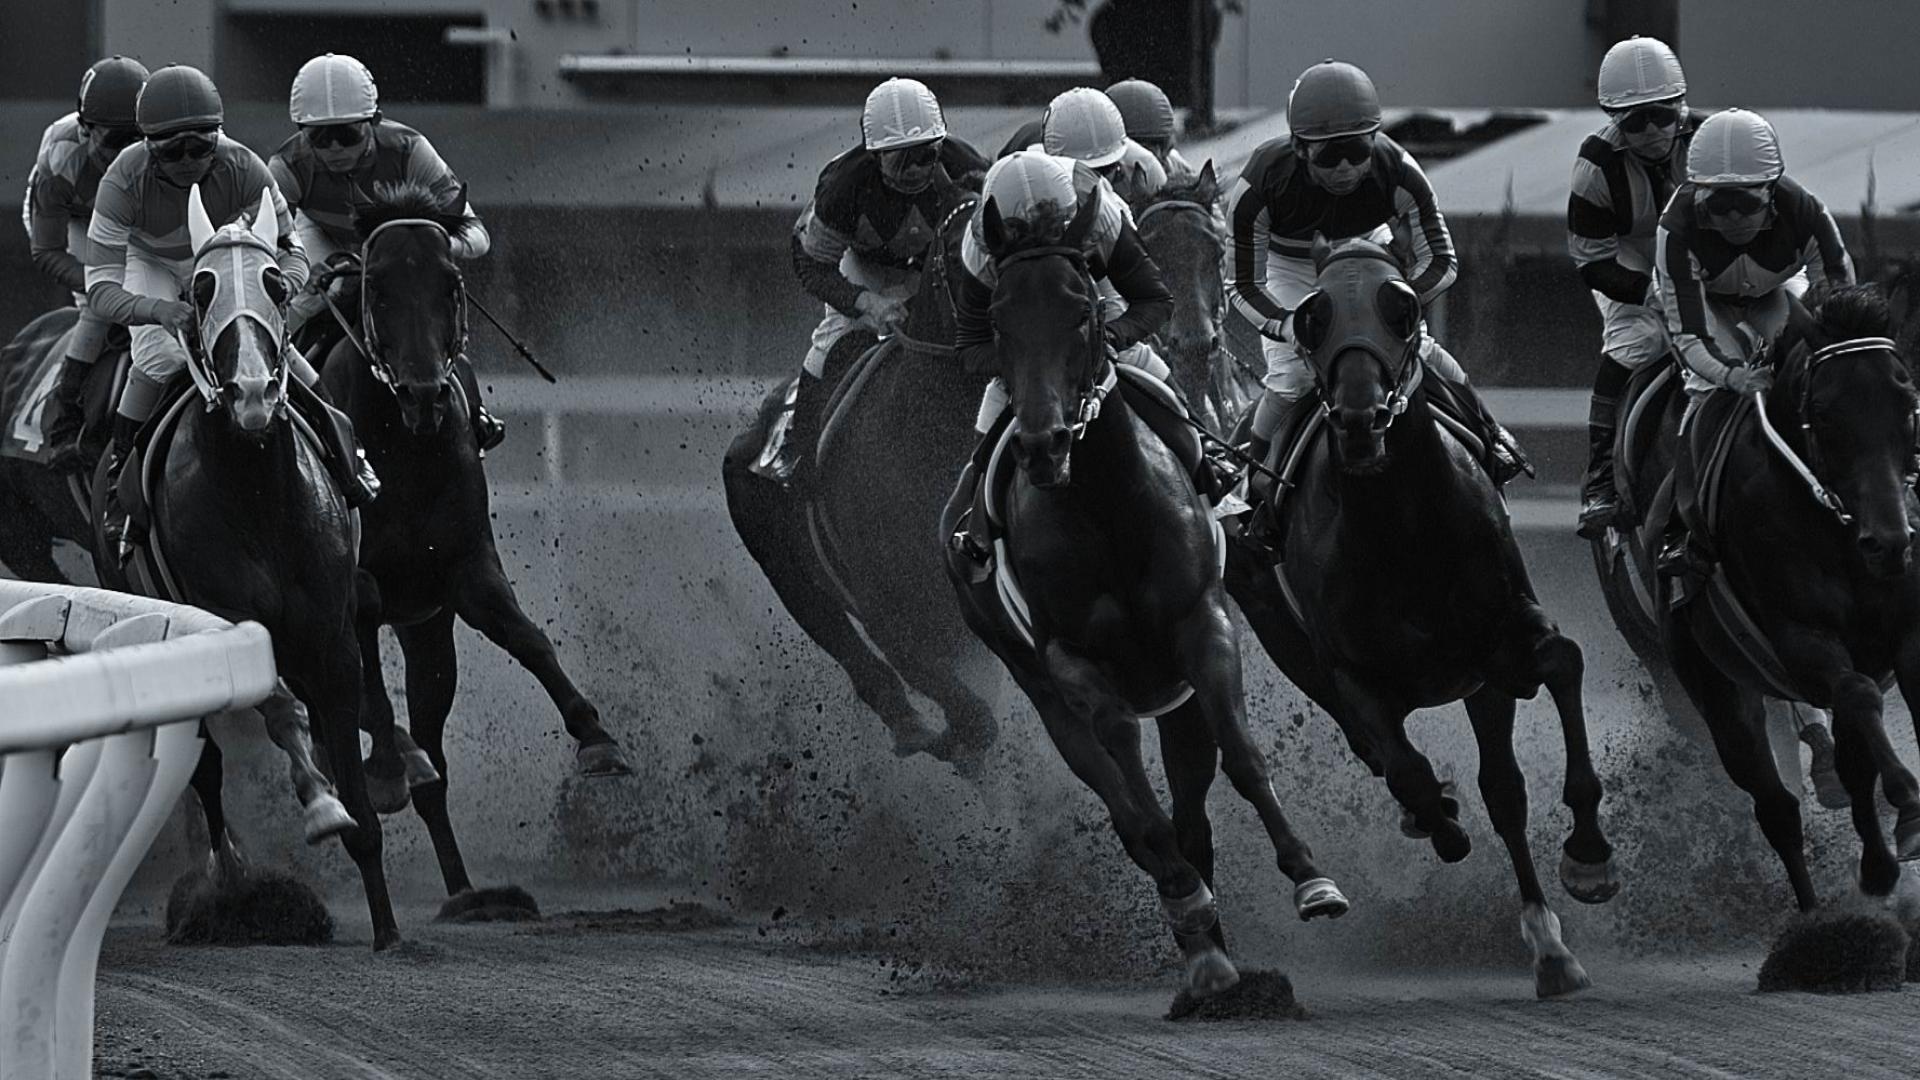 Horse Racing Hot Wallpaper Apps on Google Play. Adorable